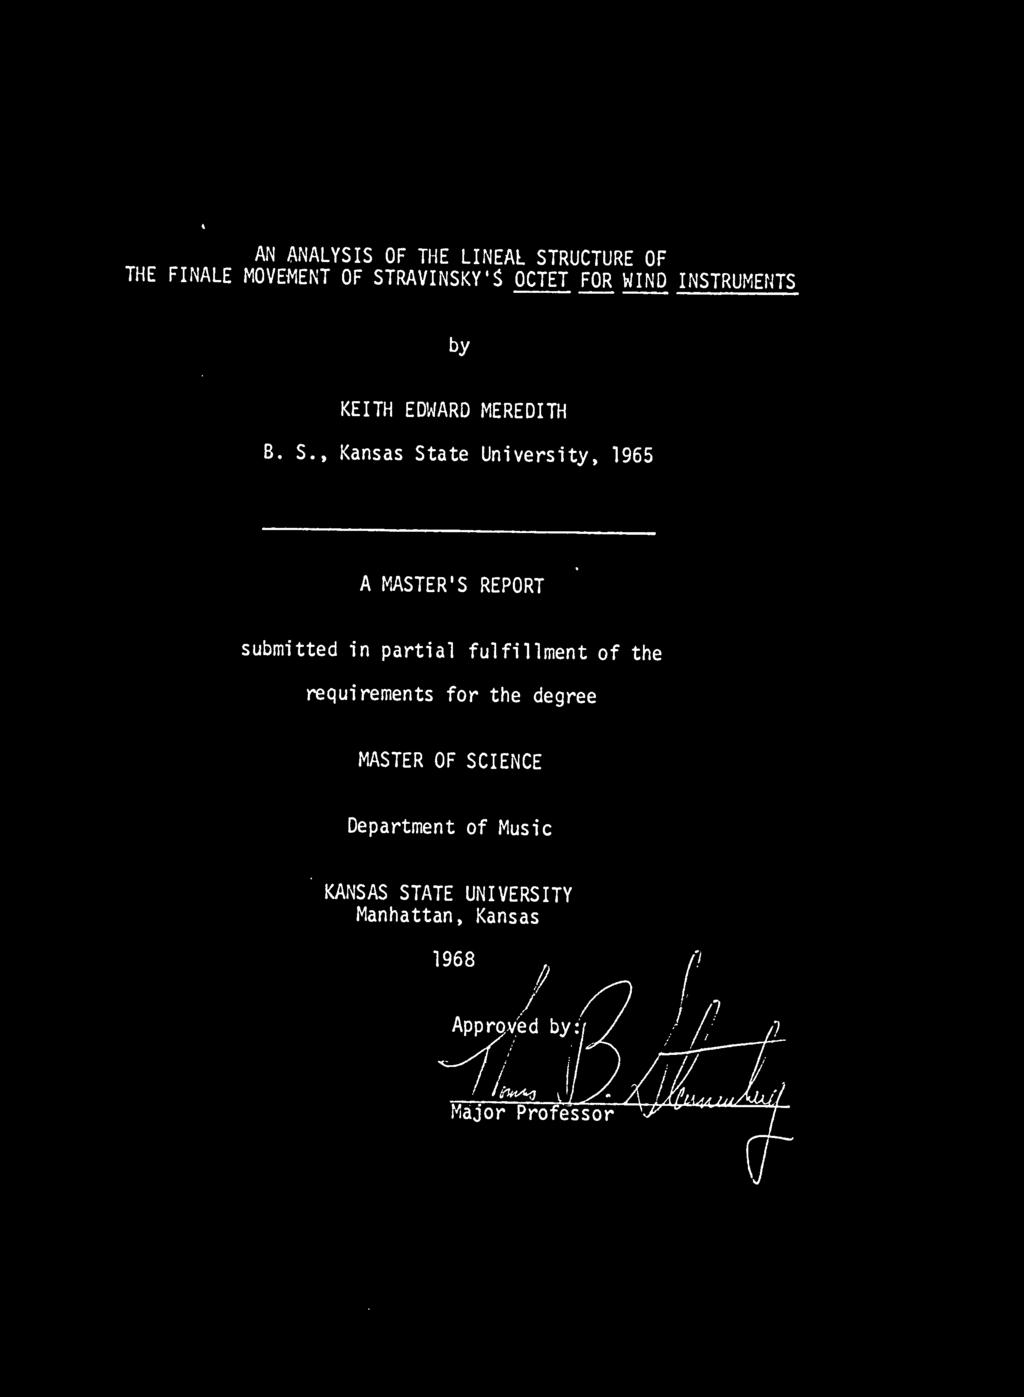 , Kansas State University, 1965 A MASTER'S REPORT submitted in partial fulfillment